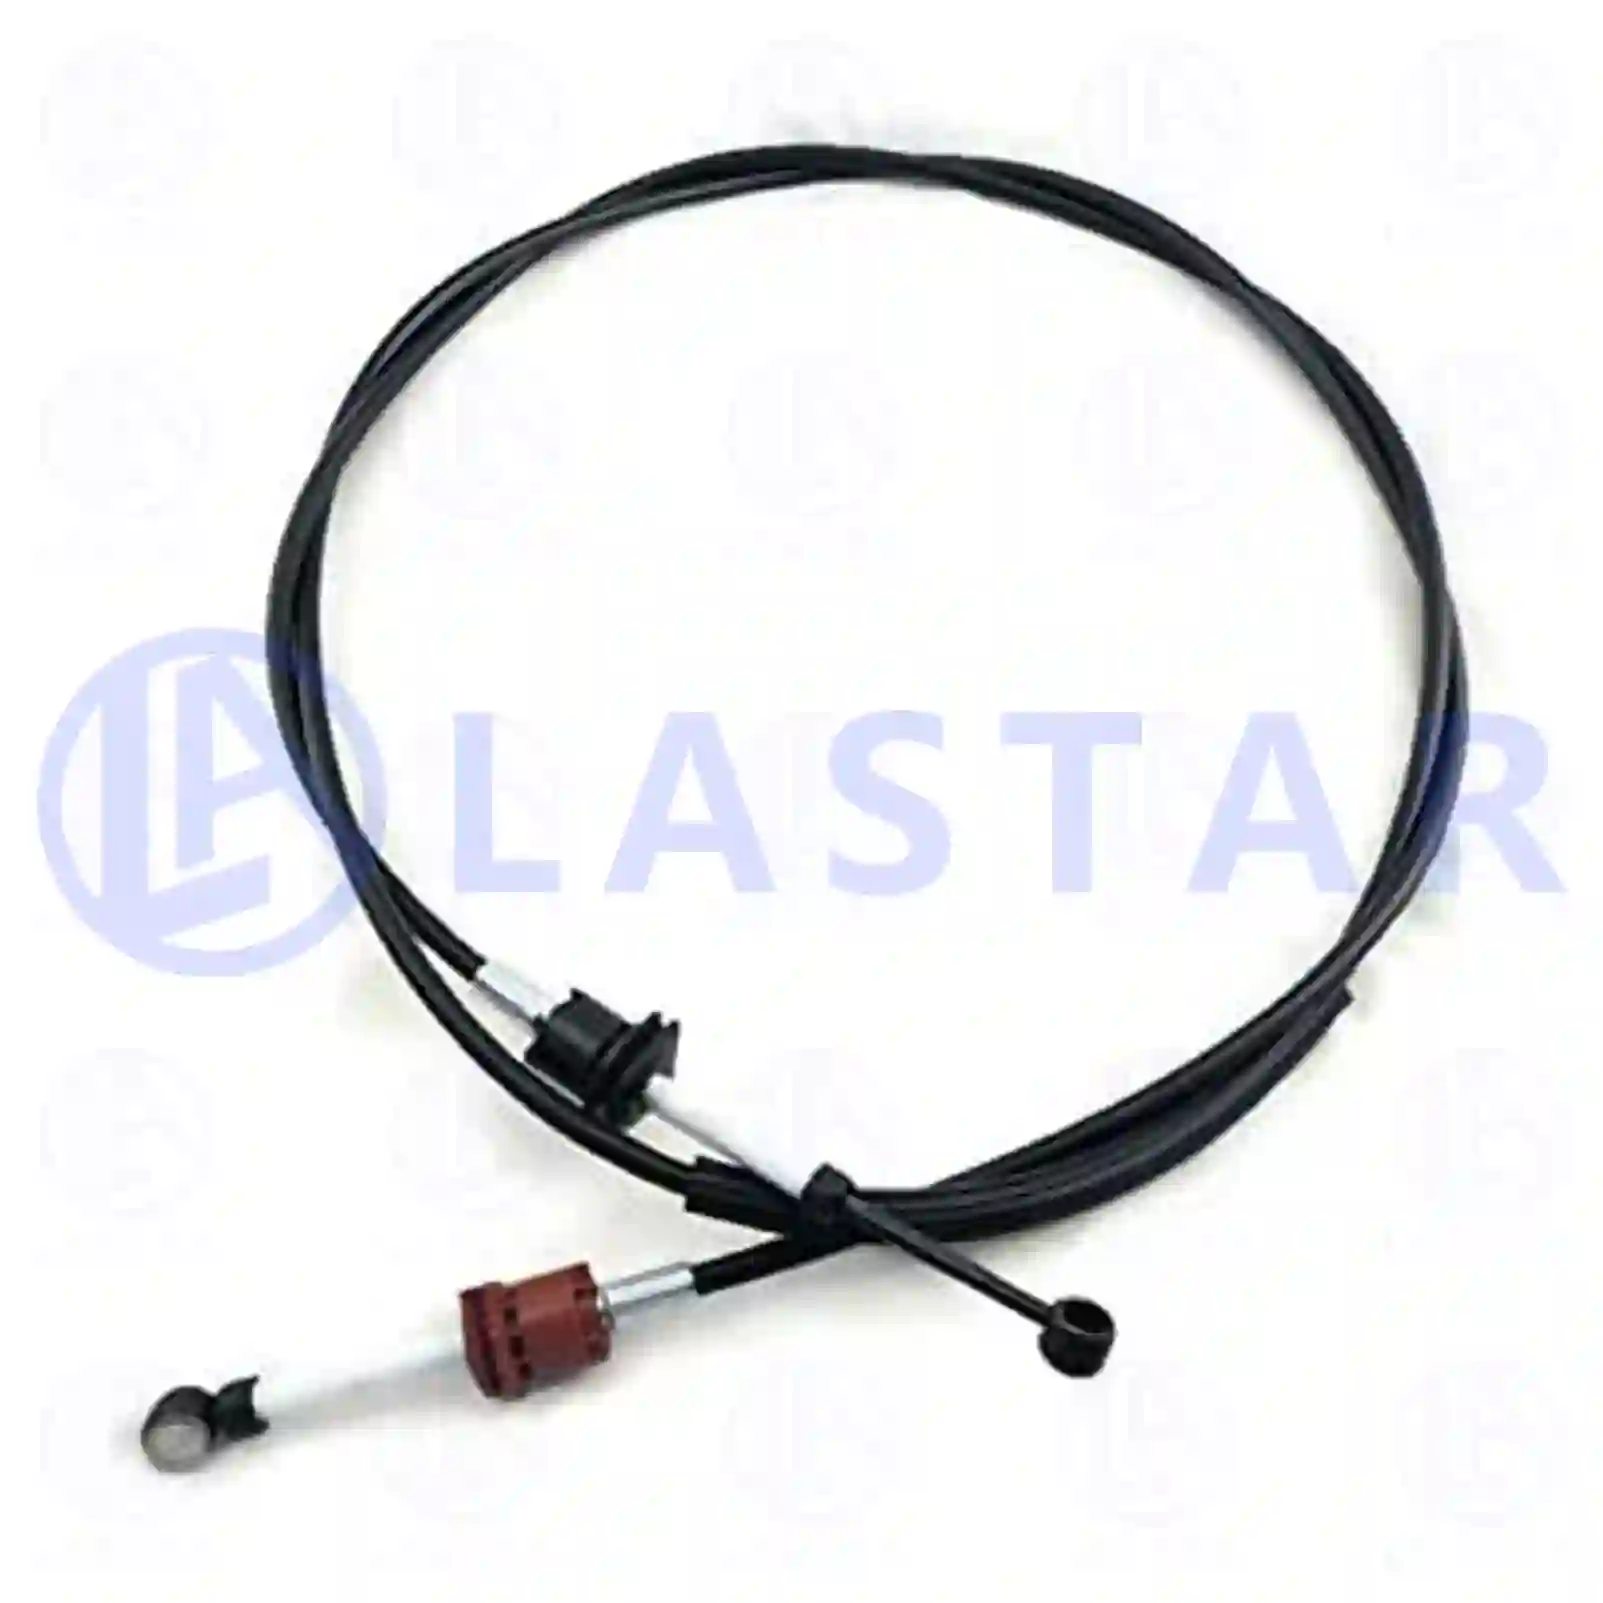 Control cable, switching, 77732680, 20545958, 20702958, 21002858, 21789674 ||  77732680 Lastar Spare Part | Truck Spare Parts, Auotomotive Spare Parts Control cable, switching, 77732680, 20545958, 20702958, 21002858, 21789674 ||  77732680 Lastar Spare Part | Truck Spare Parts, Auotomotive Spare Parts